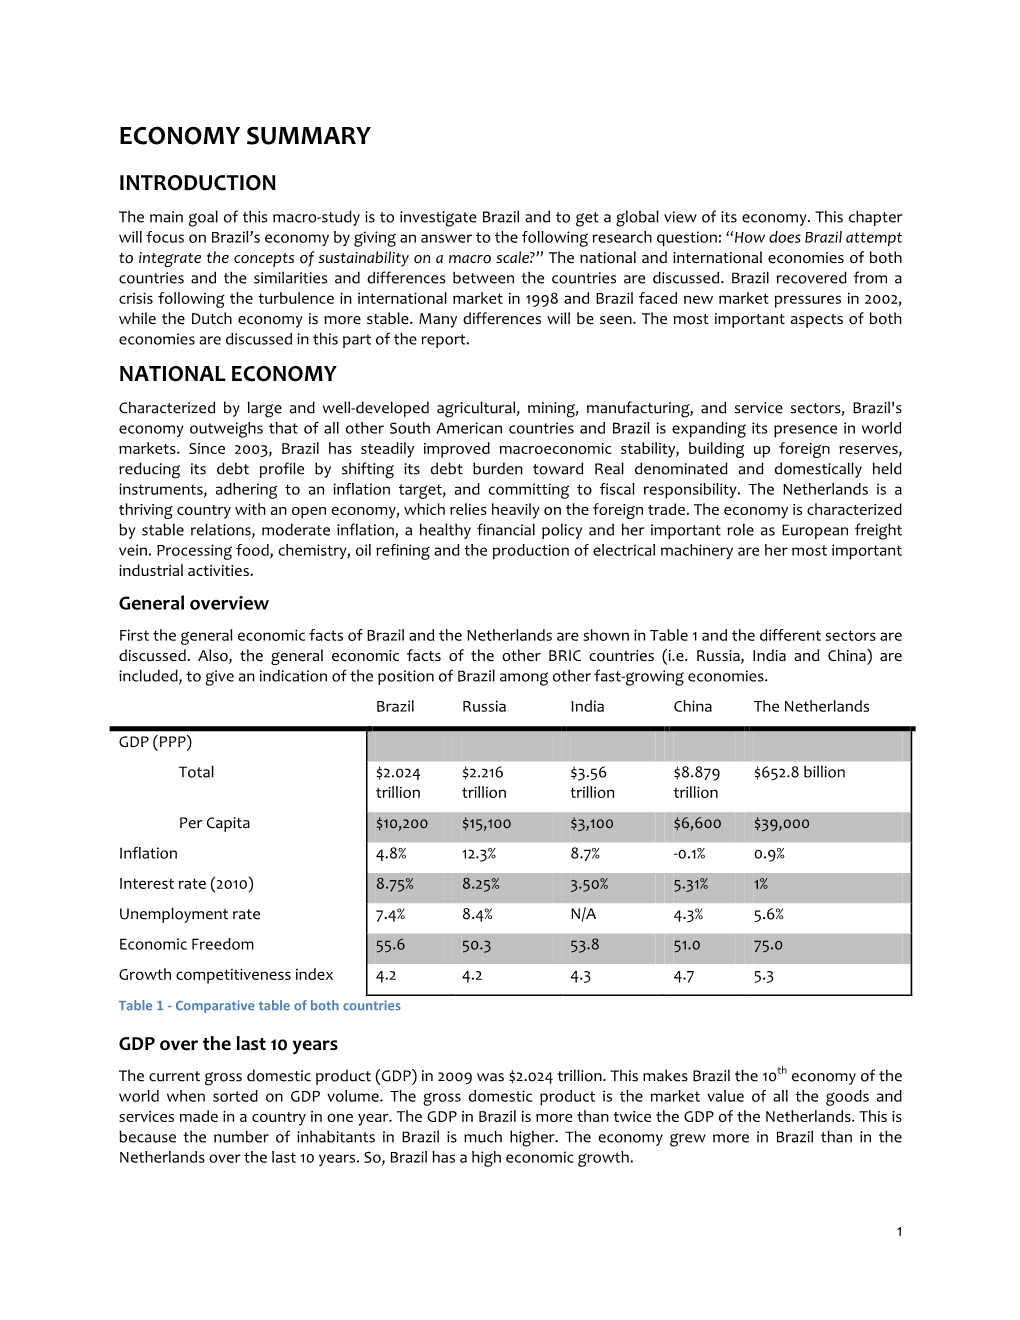 ECONOMY SUMMARY INTRODUCTION the Main Goal of This Macro-Study Is to Investigate Brazil and to Get a Global View of Its Economy